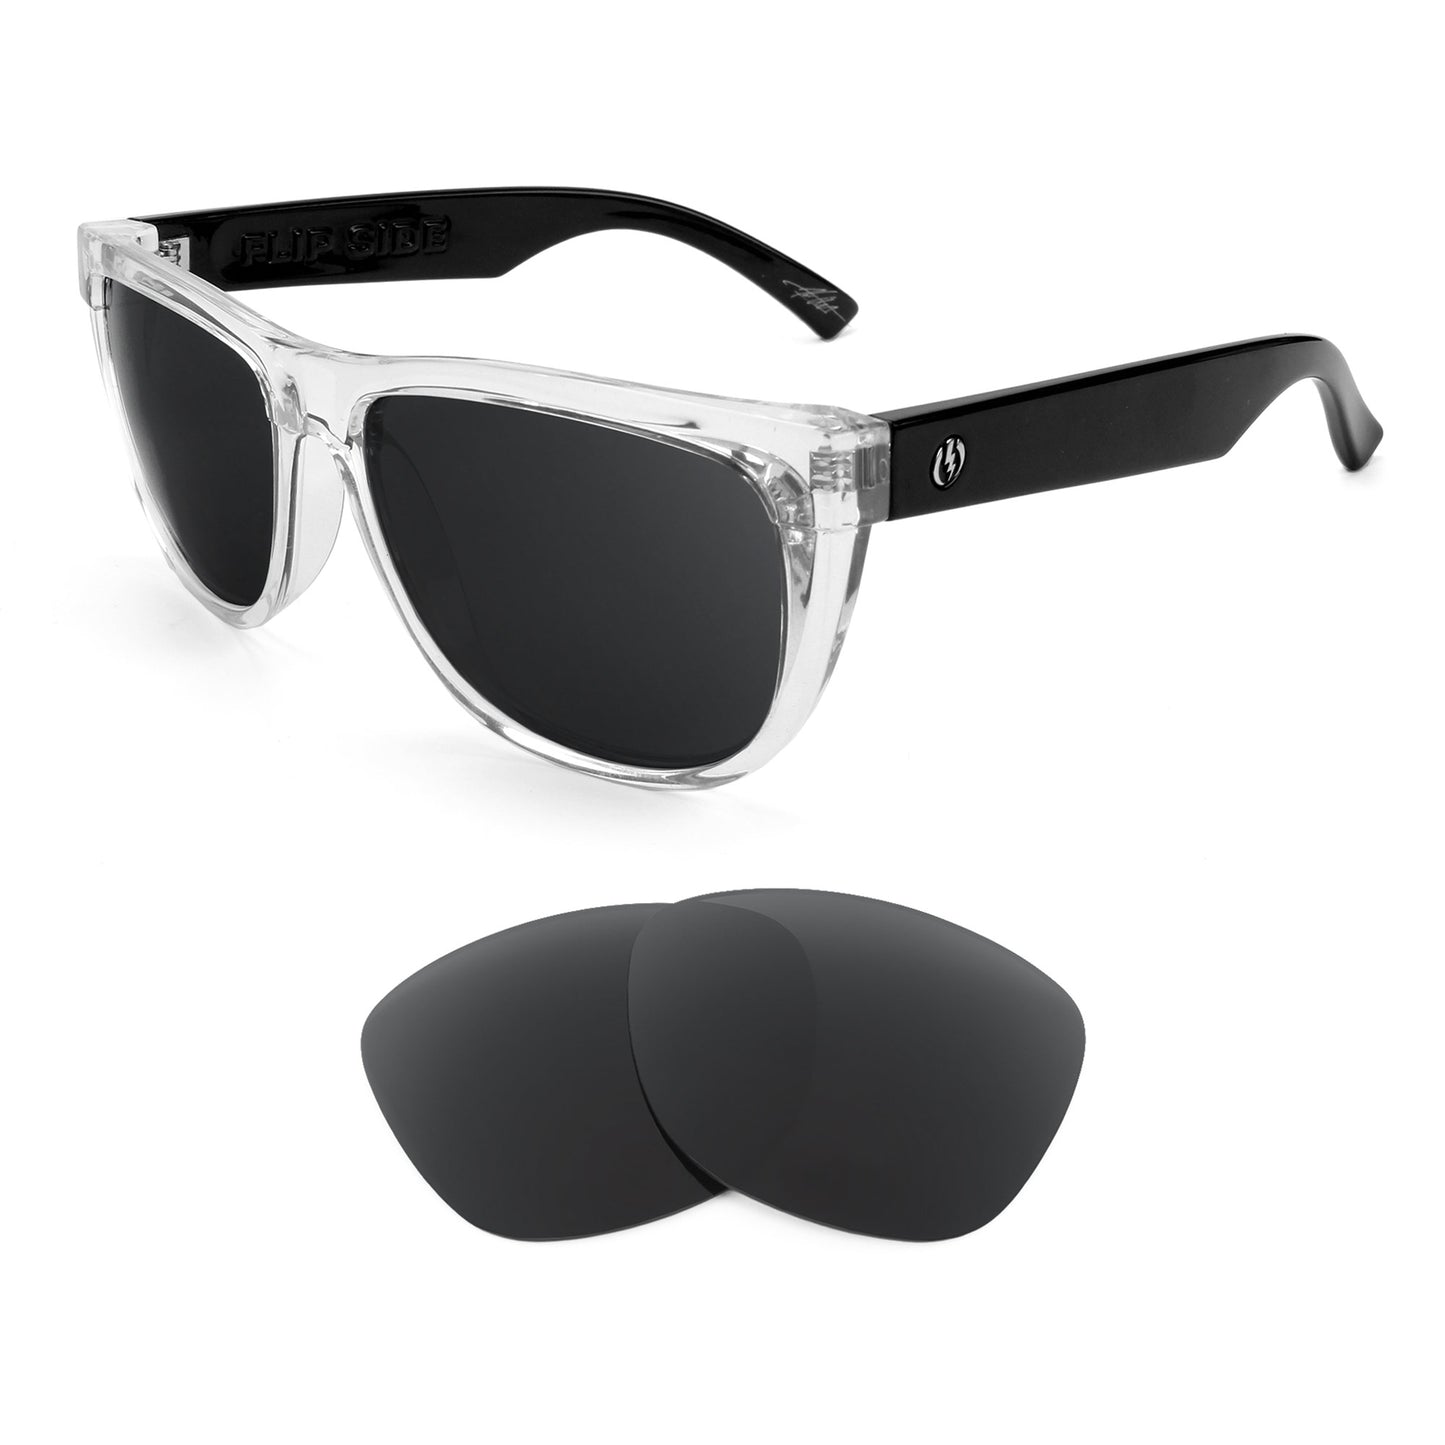 Electric Flip Side sunglasses with replacement lenses